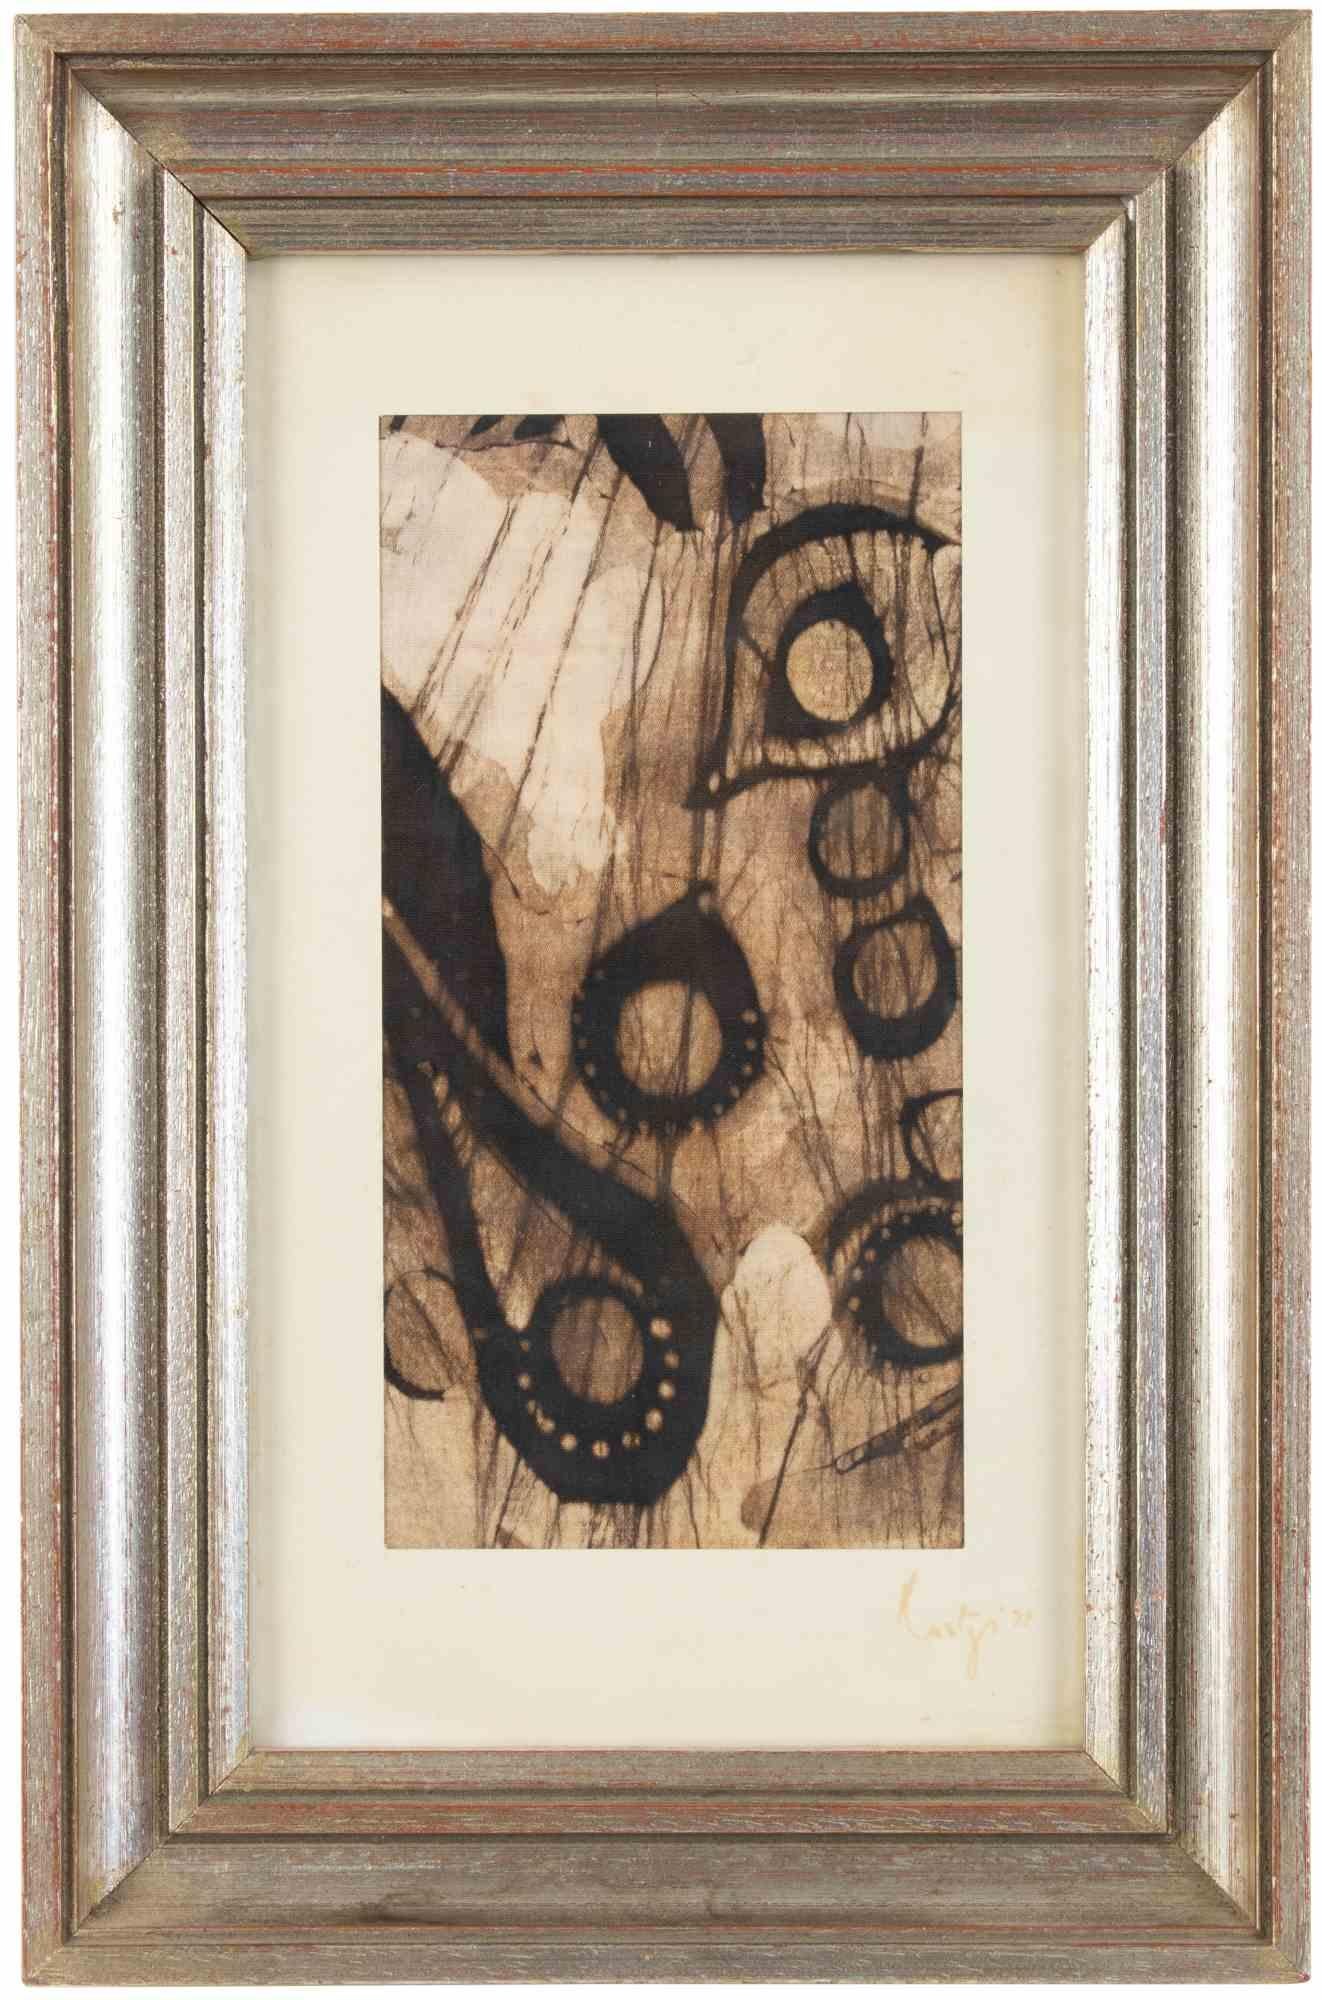 Unknown Abstract Print - Abstract Composition - Drawing - Mid-20th century